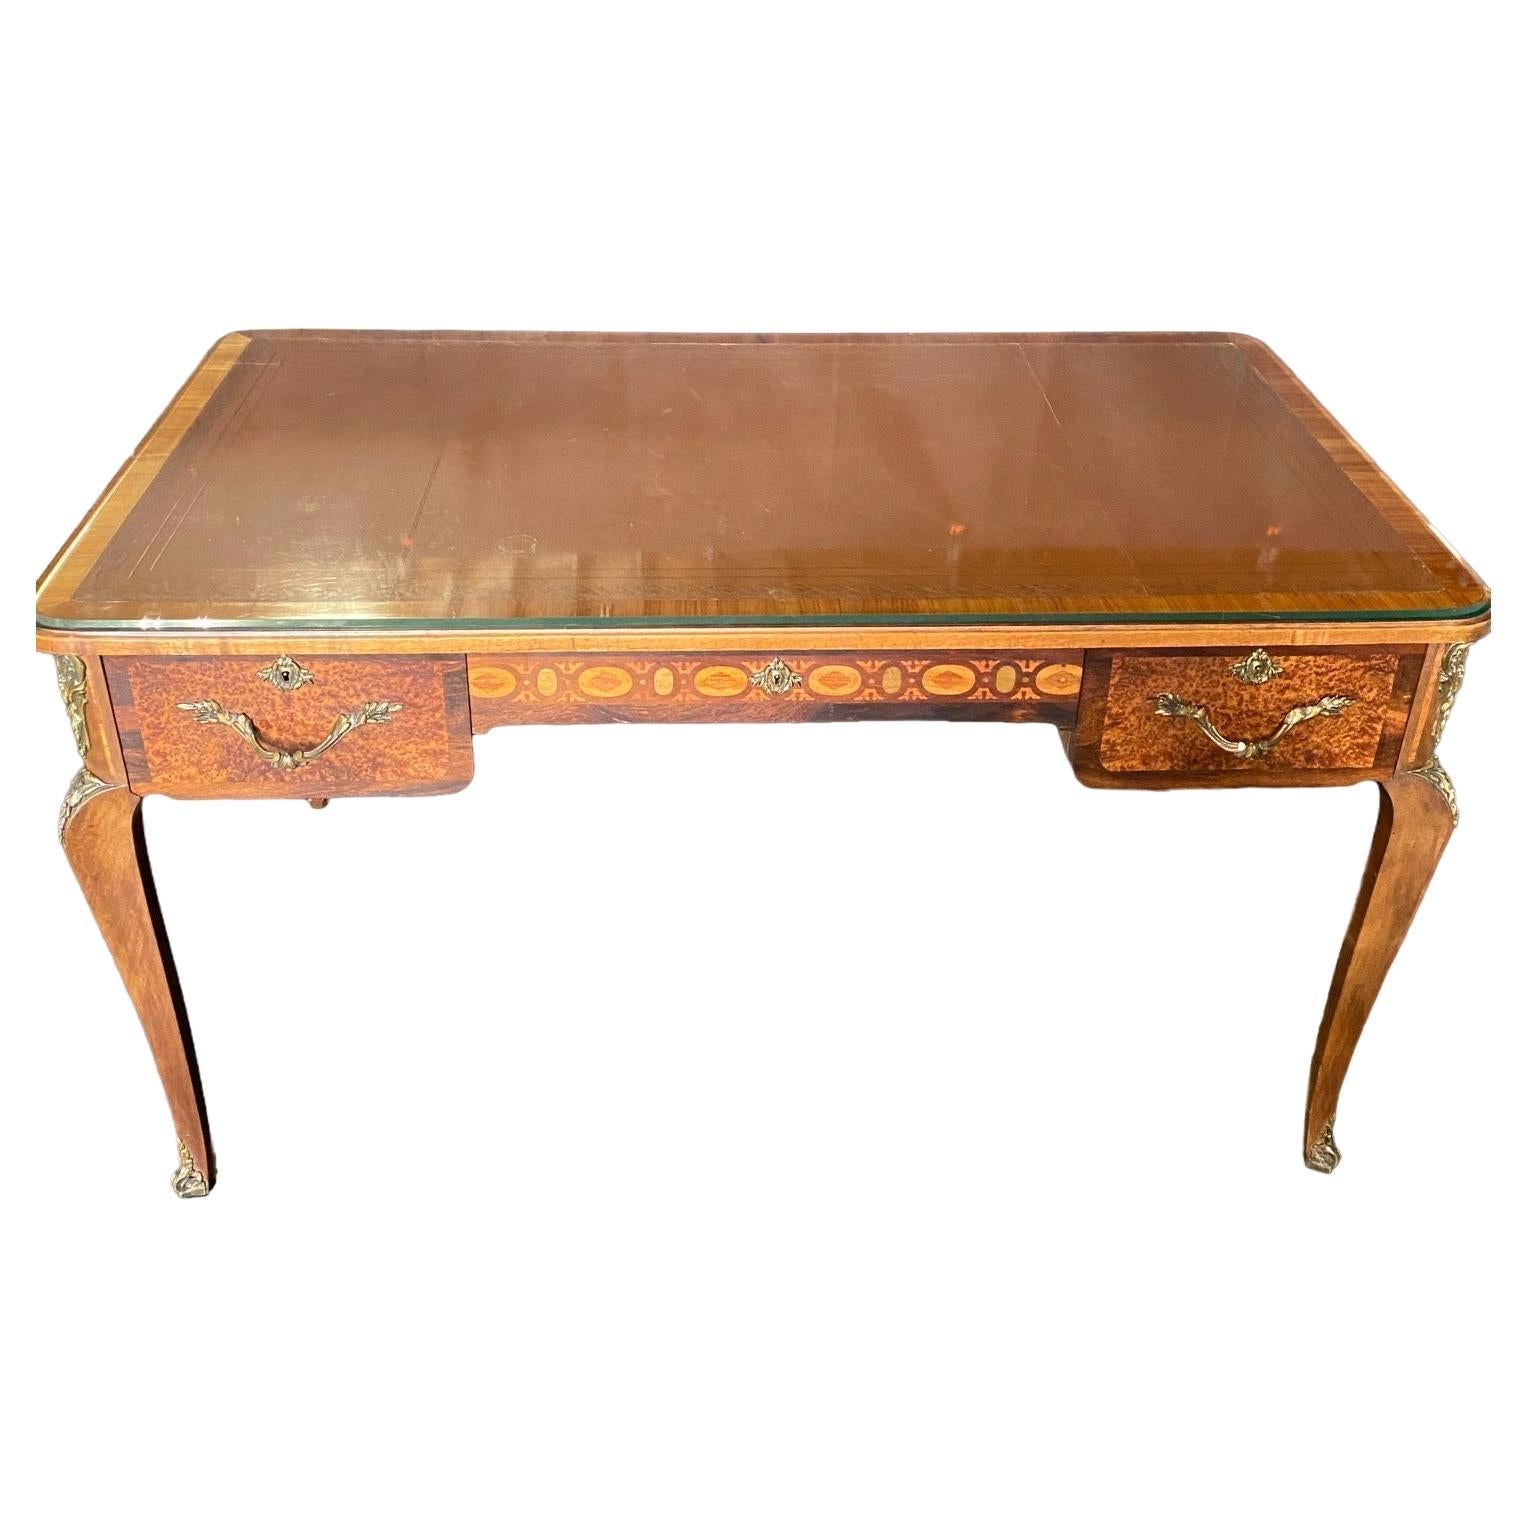  French 19th Century Leather Top Louis XV Style Writing Desk or Bureau Plat For Sale